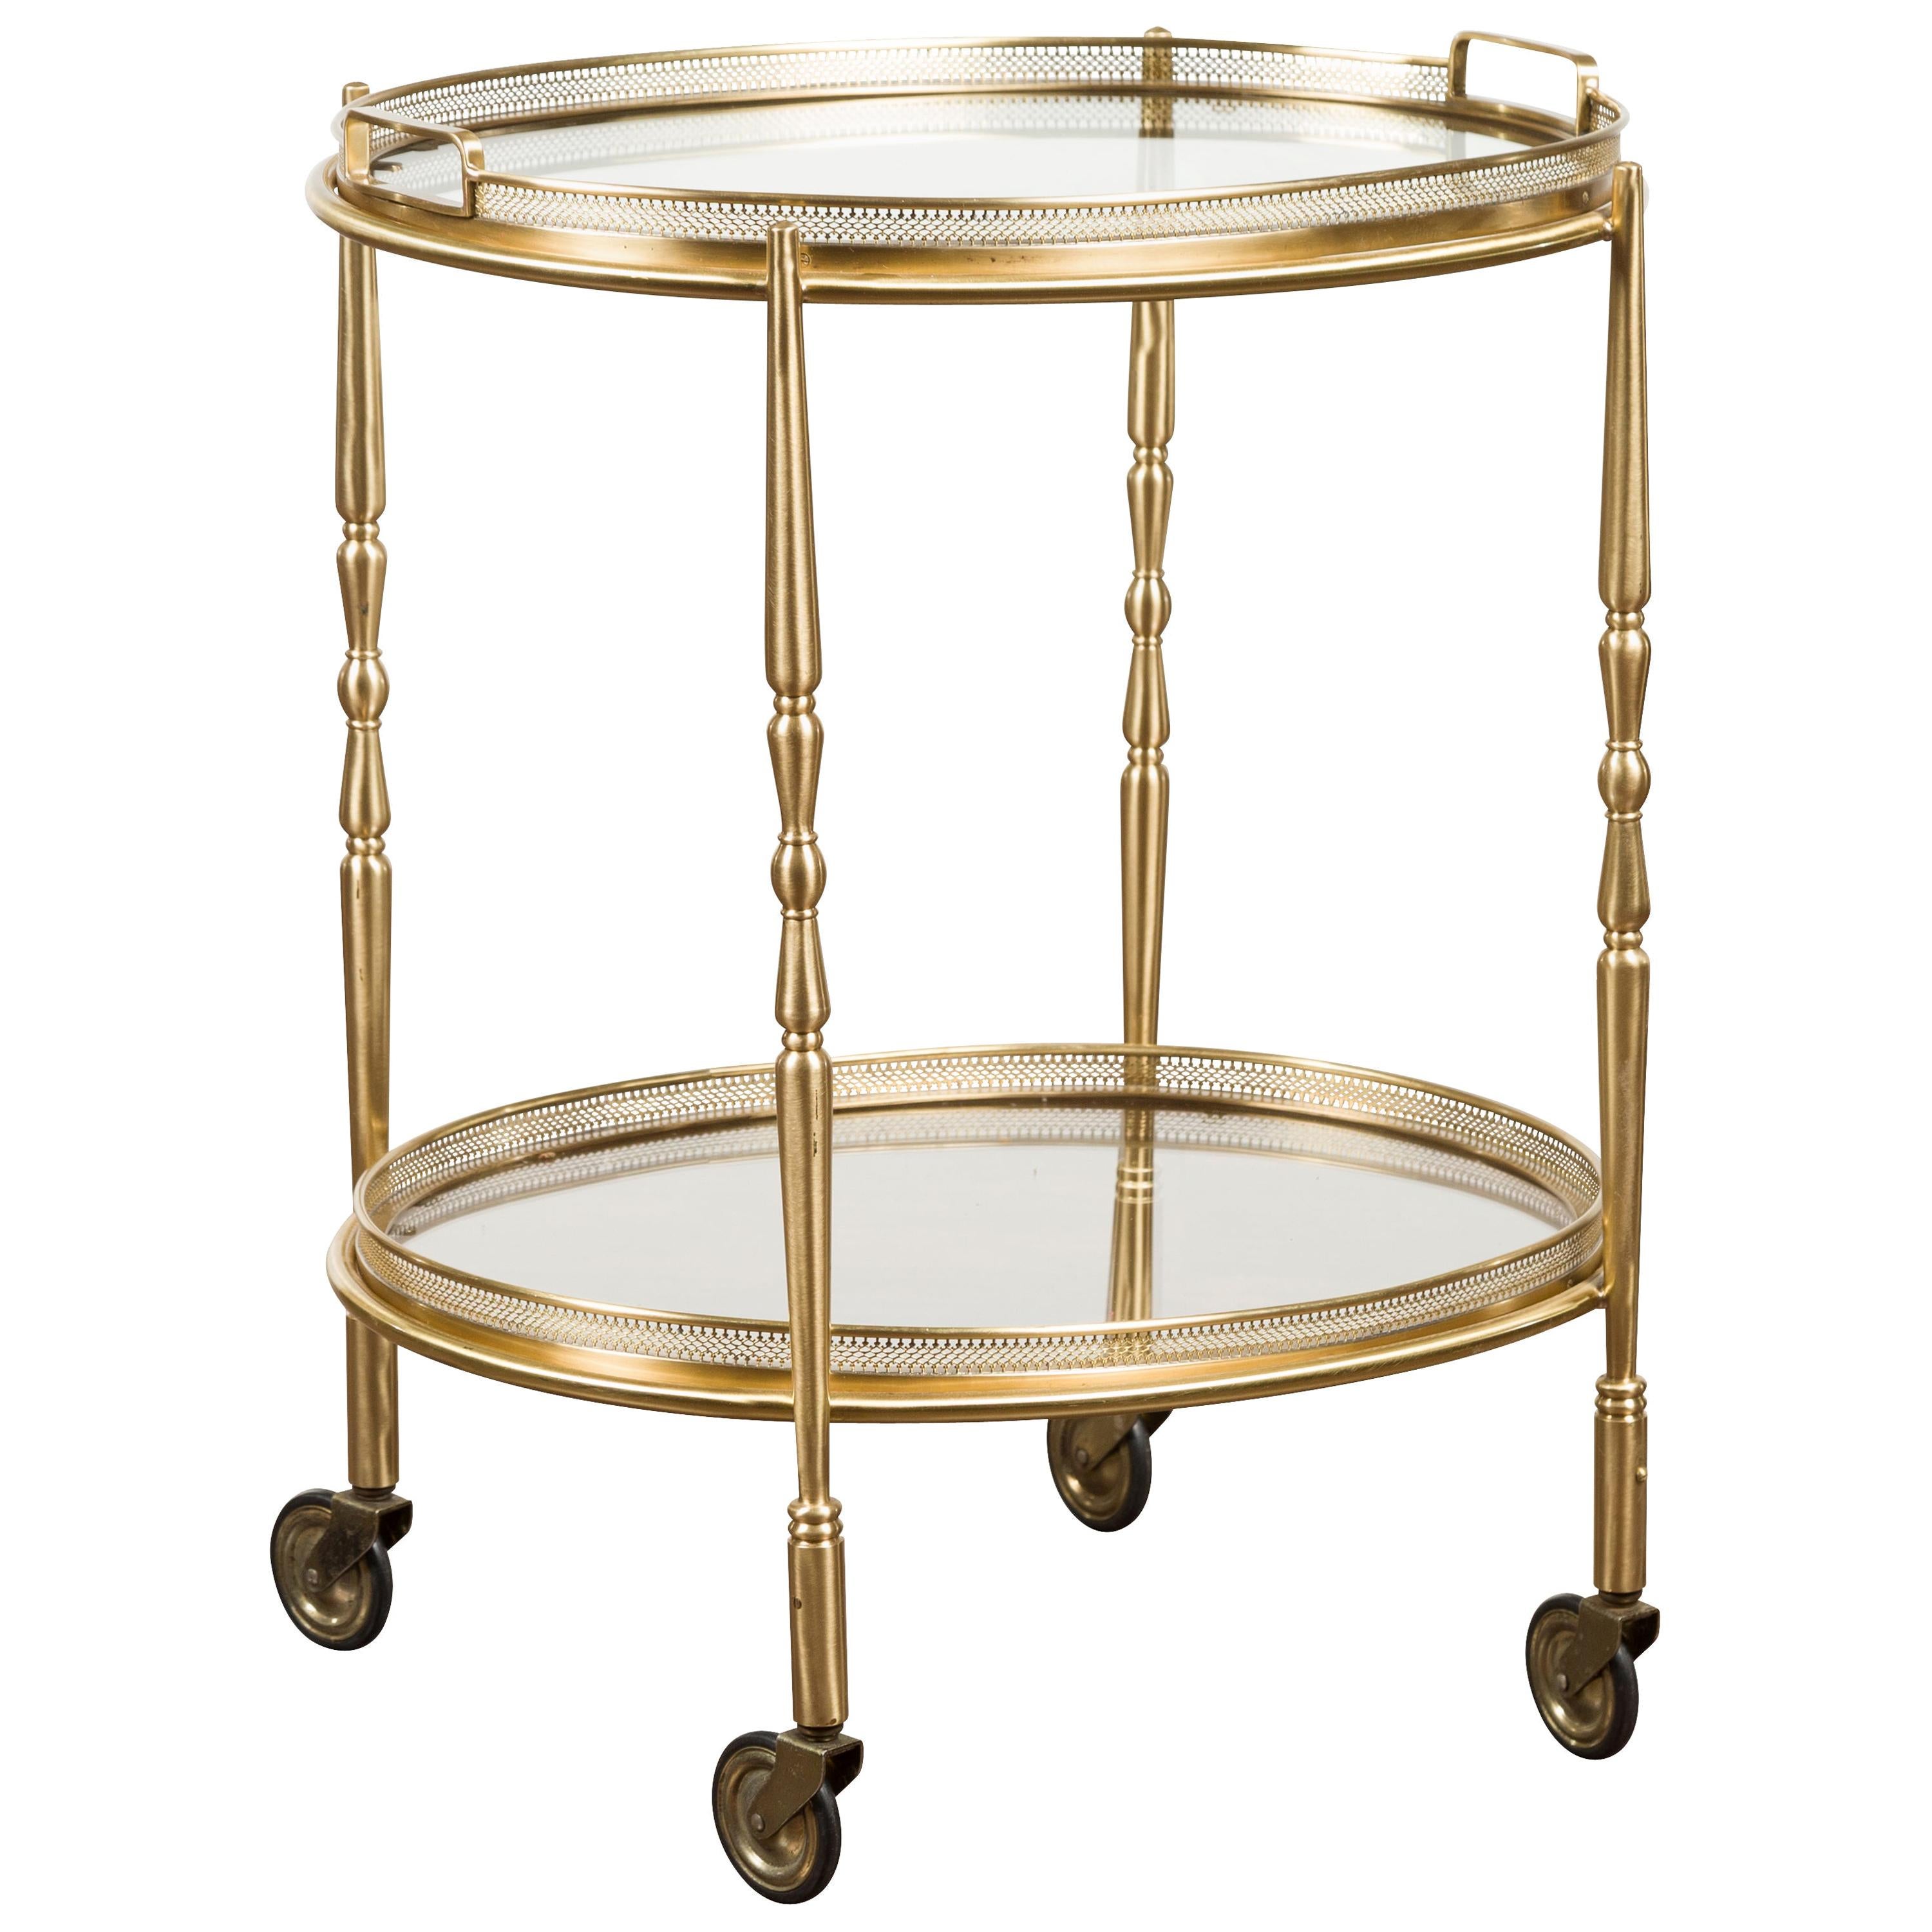 Italian Oval Brass Cart with Pierced Gallery, Glass Shelves and Casters